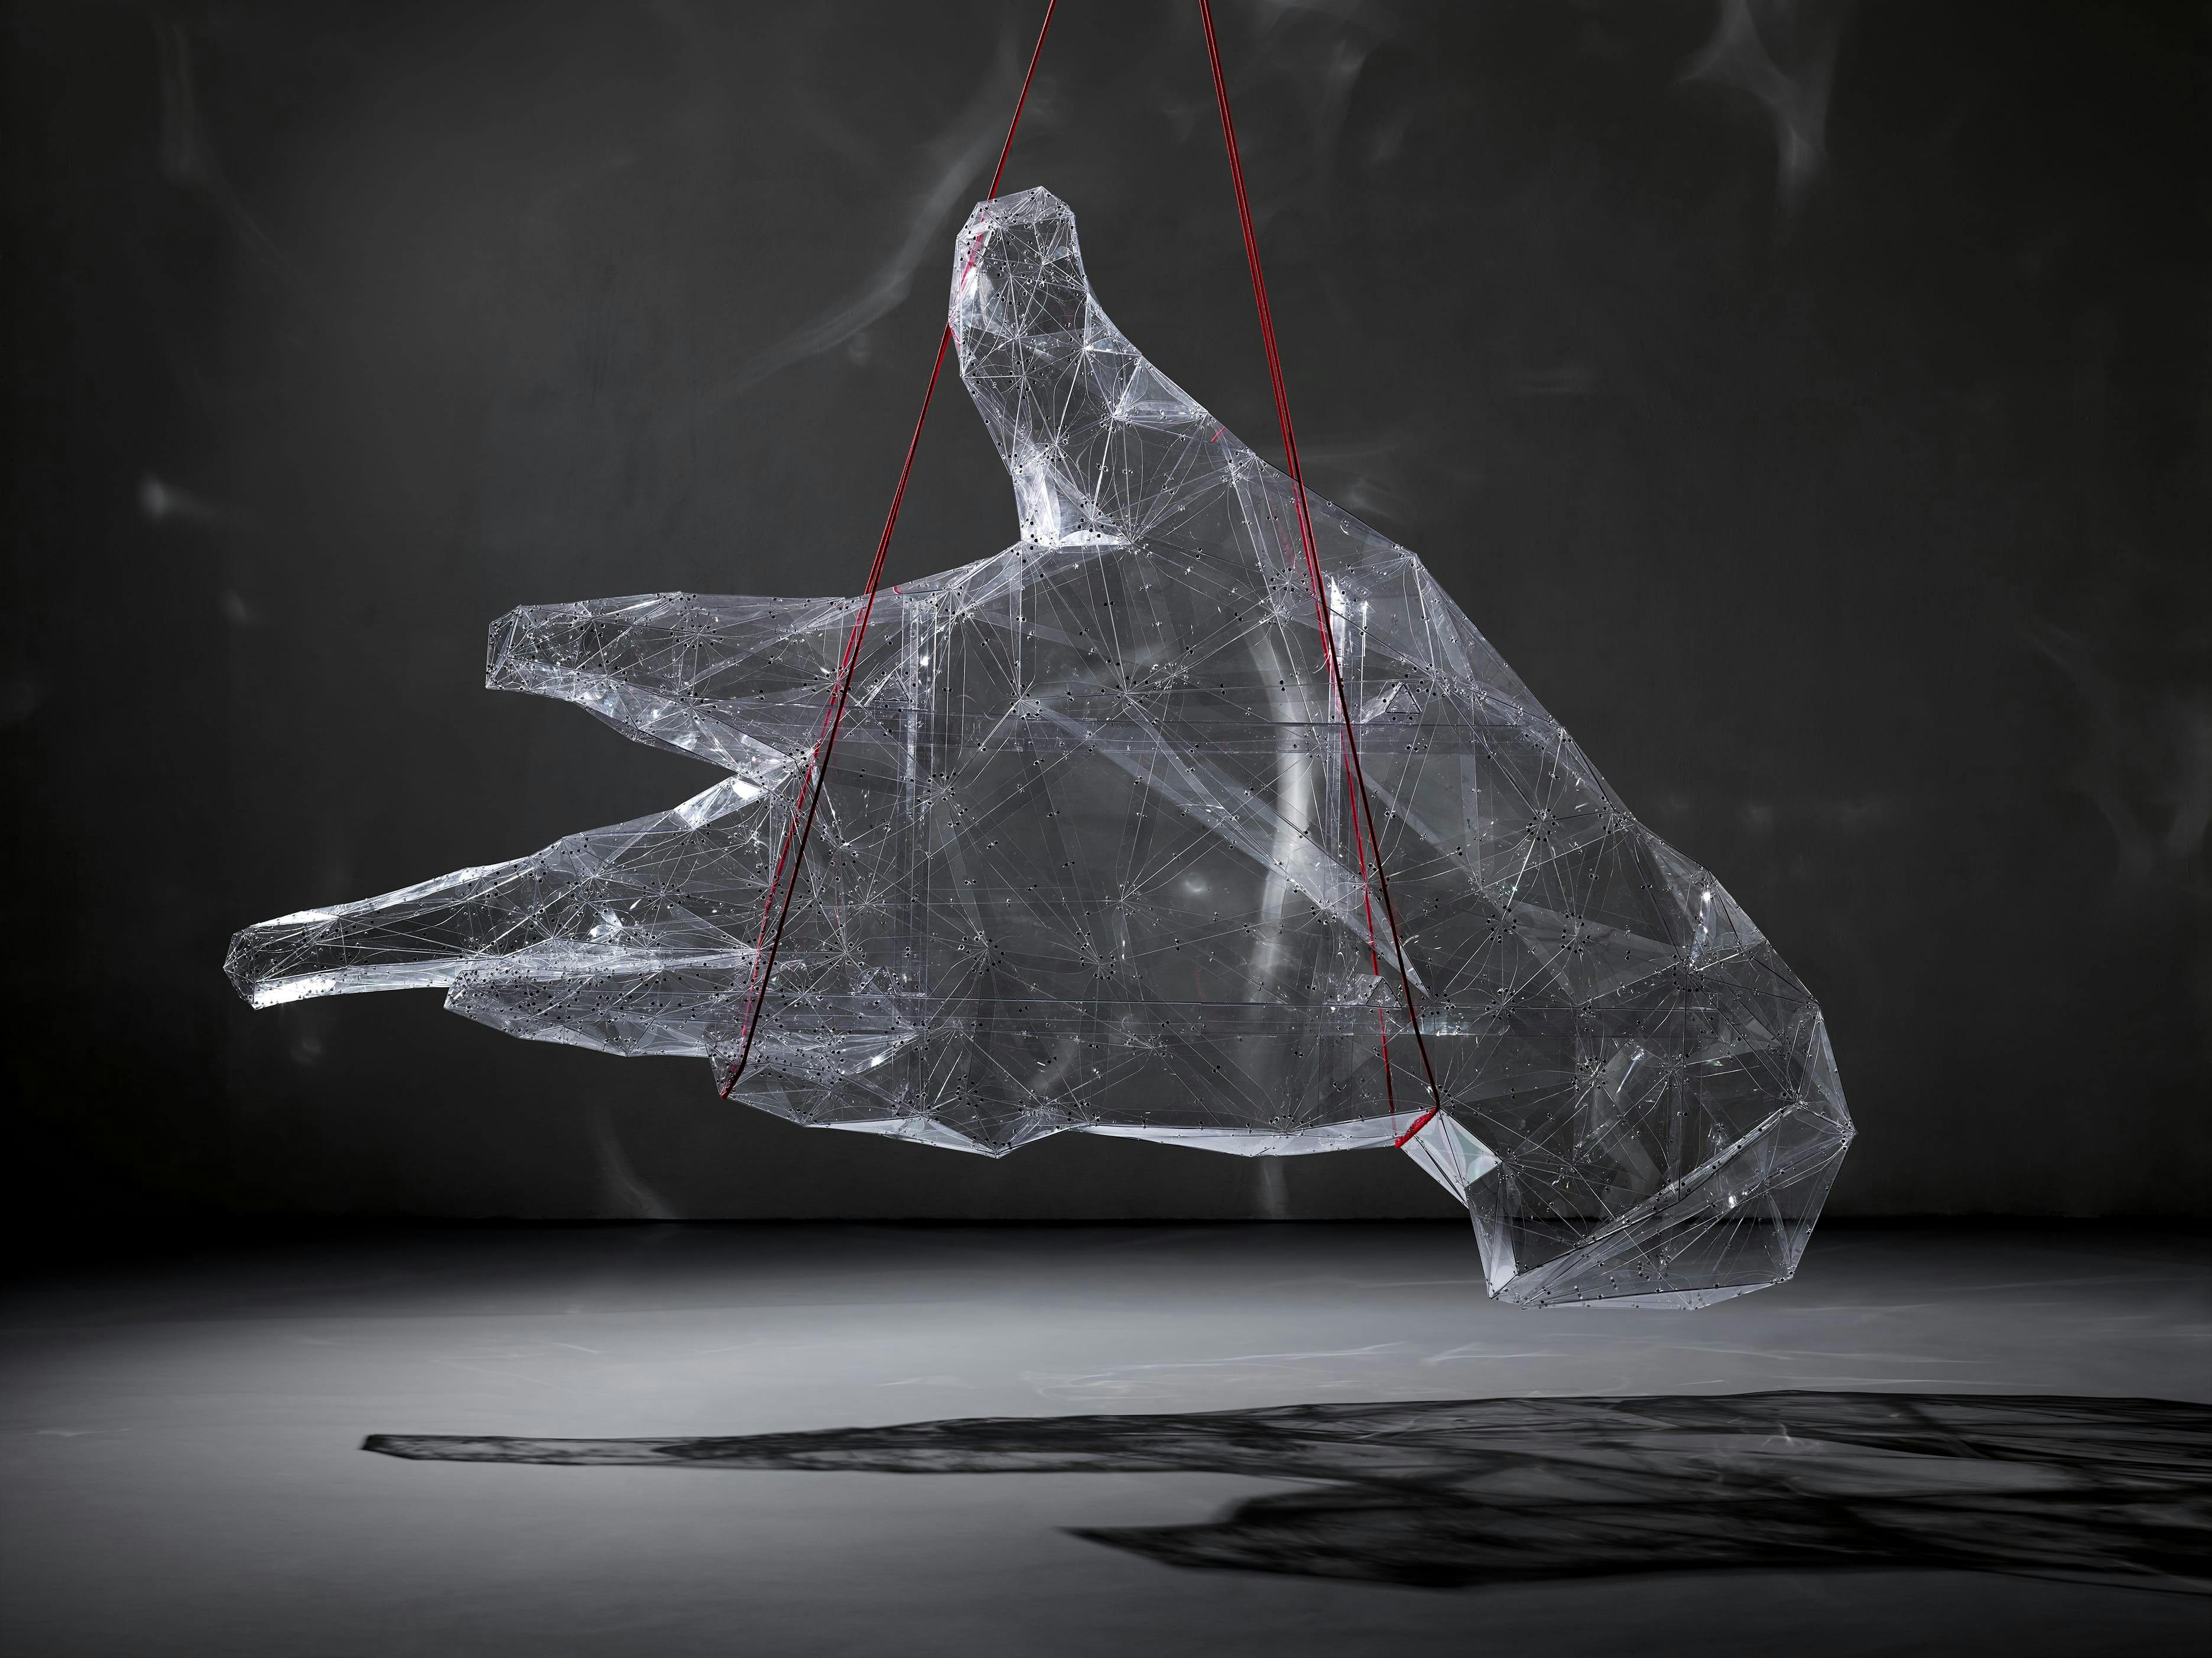 Sculpture of a transparent hand suspended by red rope